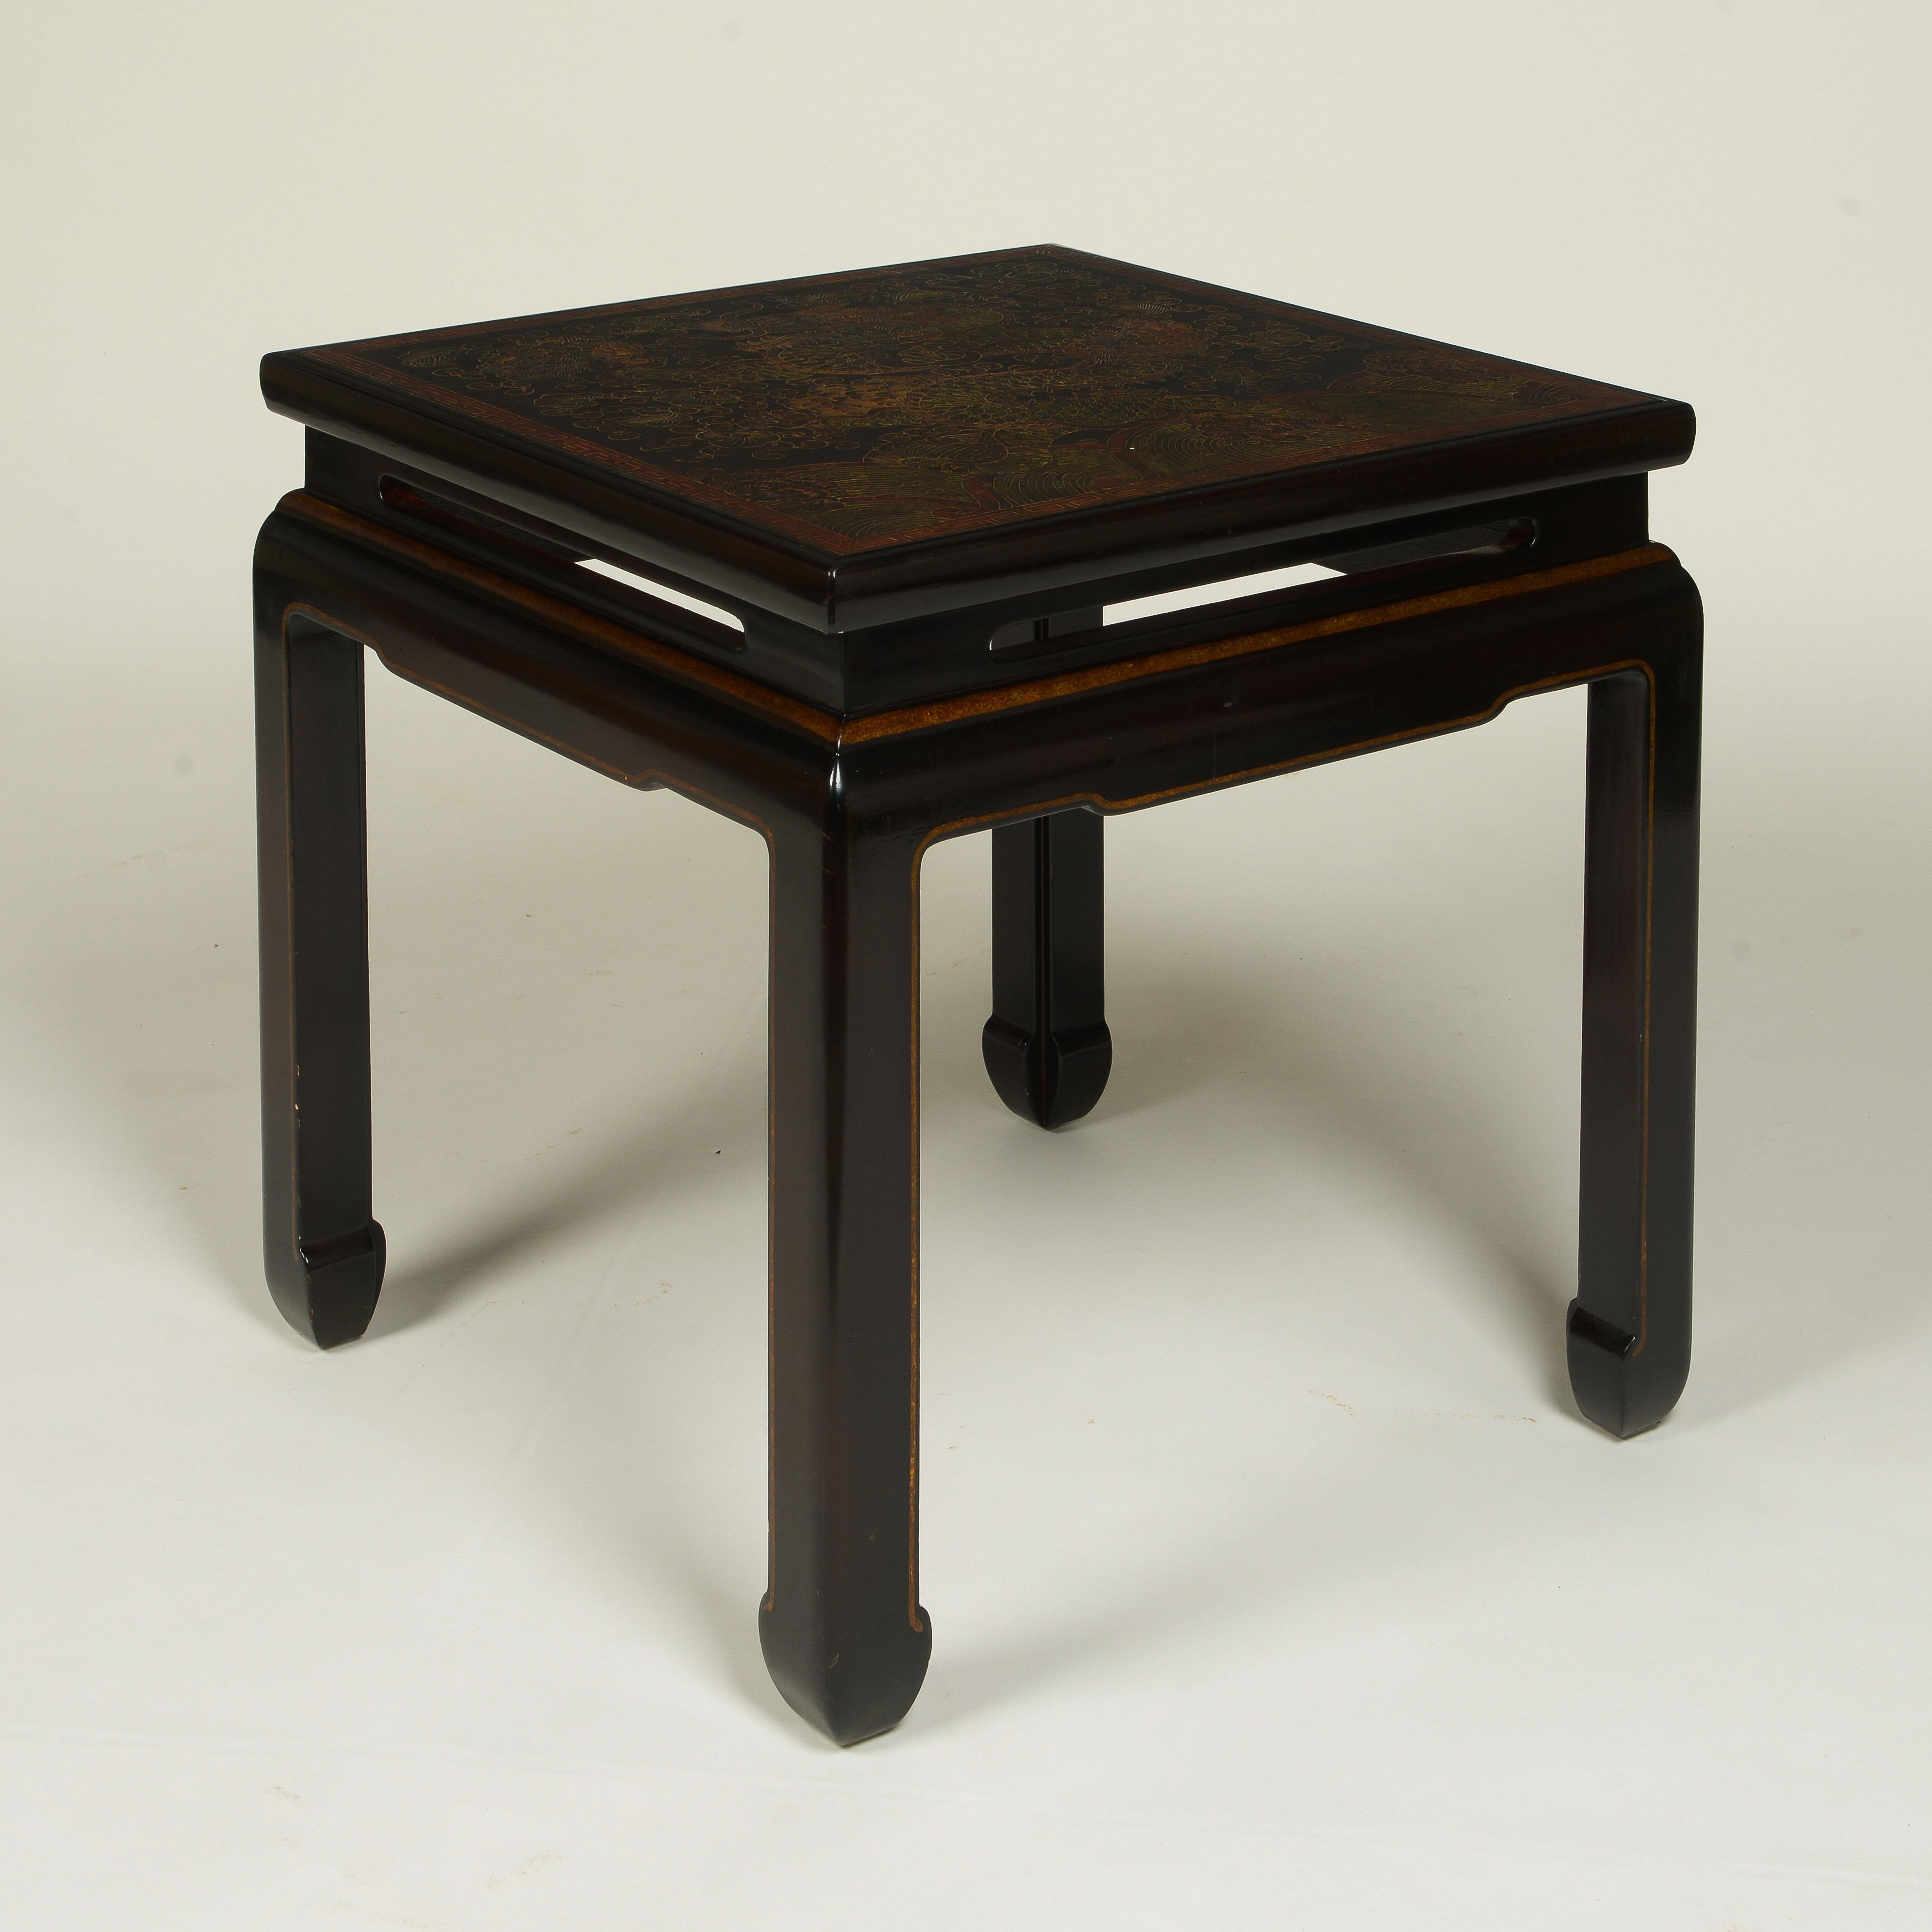 A Pair of Chinoiserie Dark Brown Coromandel Lacquer Square Low Tables In Good Condition For Sale In New York, NY